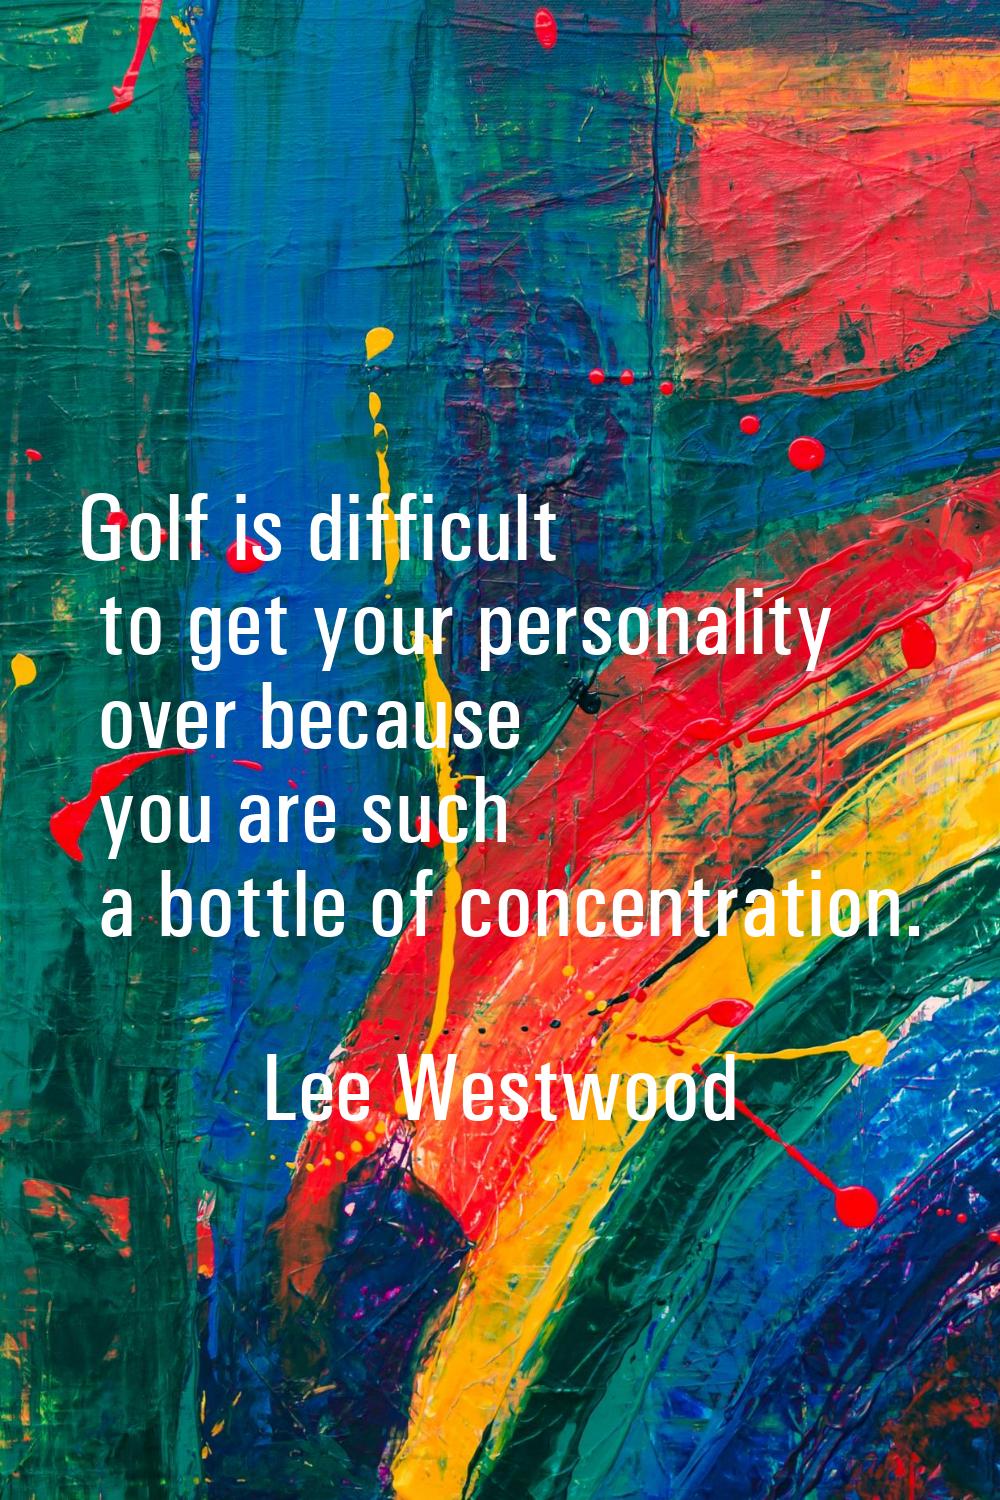 Golf is difficult to get your personality over because you are such a bottle of concentration.